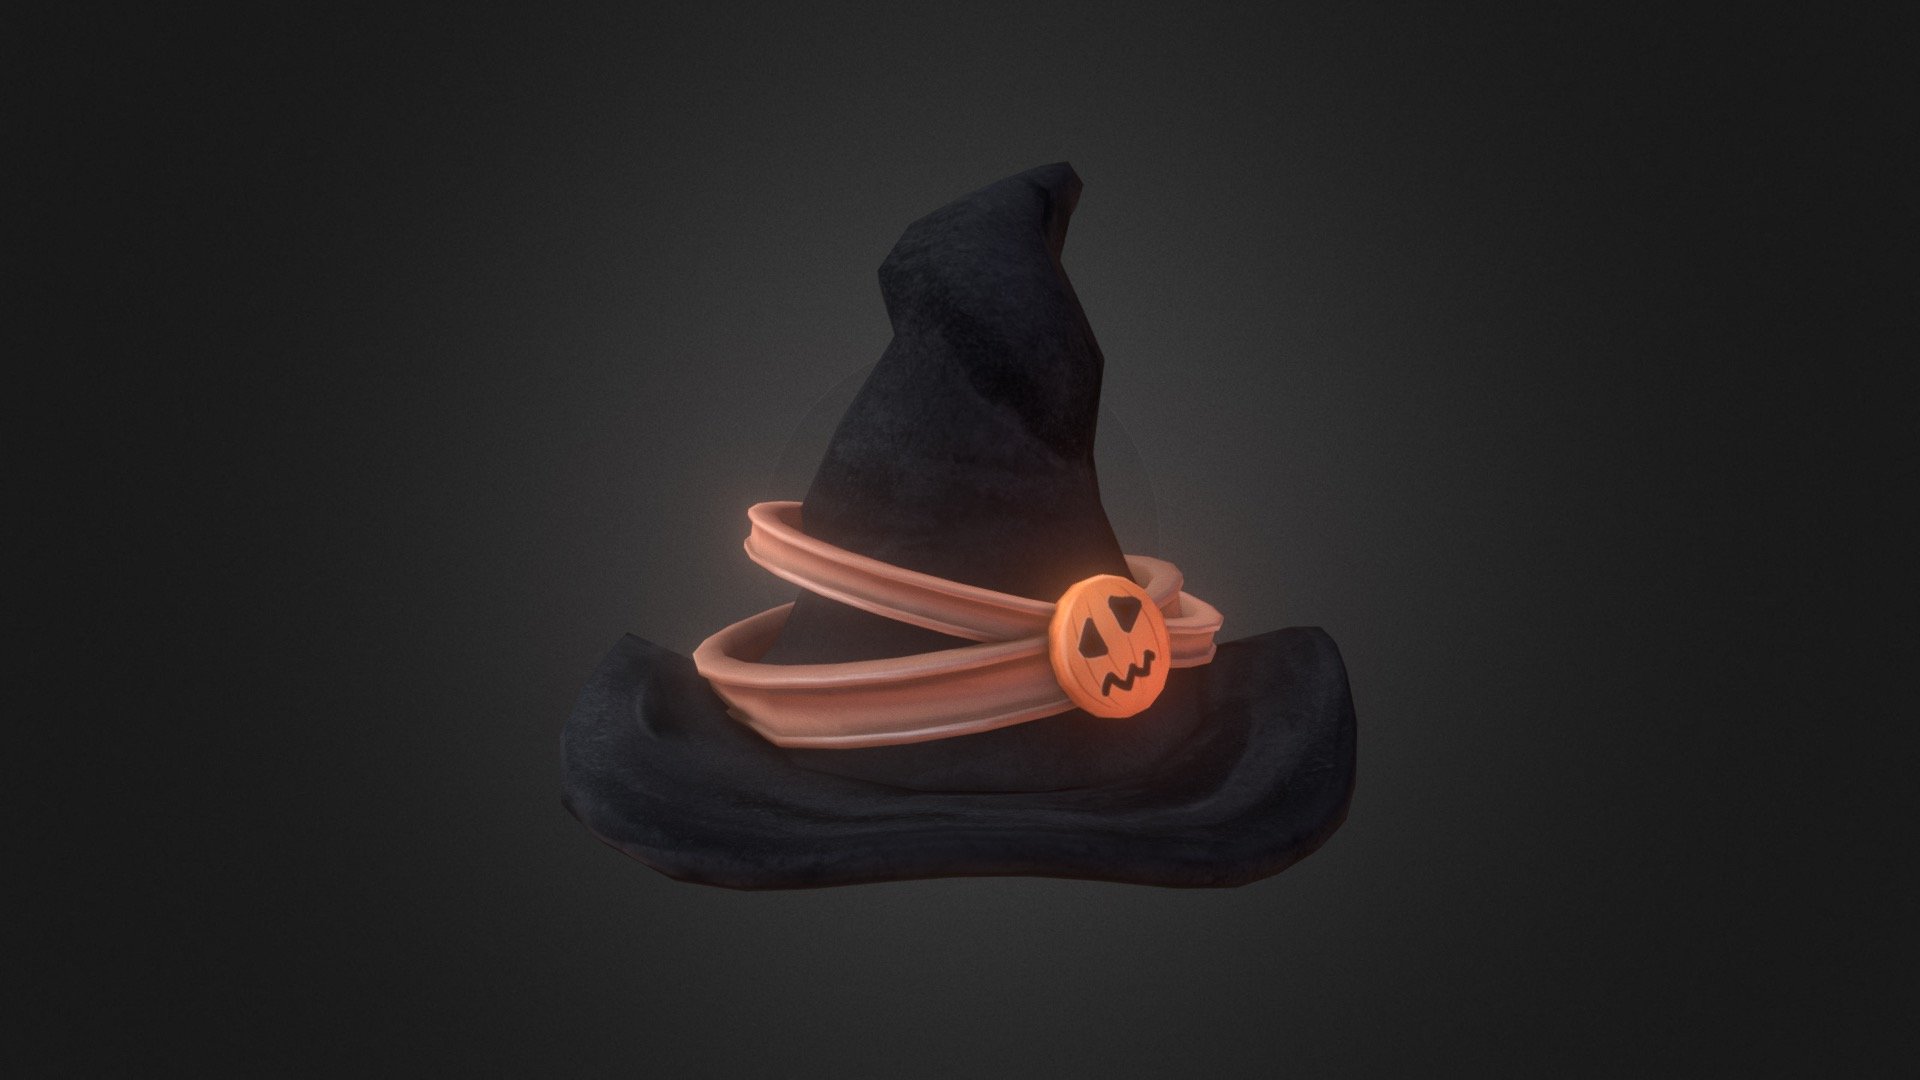 Try the Instagram filter and get ready for Halloween:
https://www.instagram.com/ar/356562239017713/

Made in Blender and Affinity Photo - Halloween witch hat (Instagram filter) - 3D model by Zale (@zalefairytale) 3d model